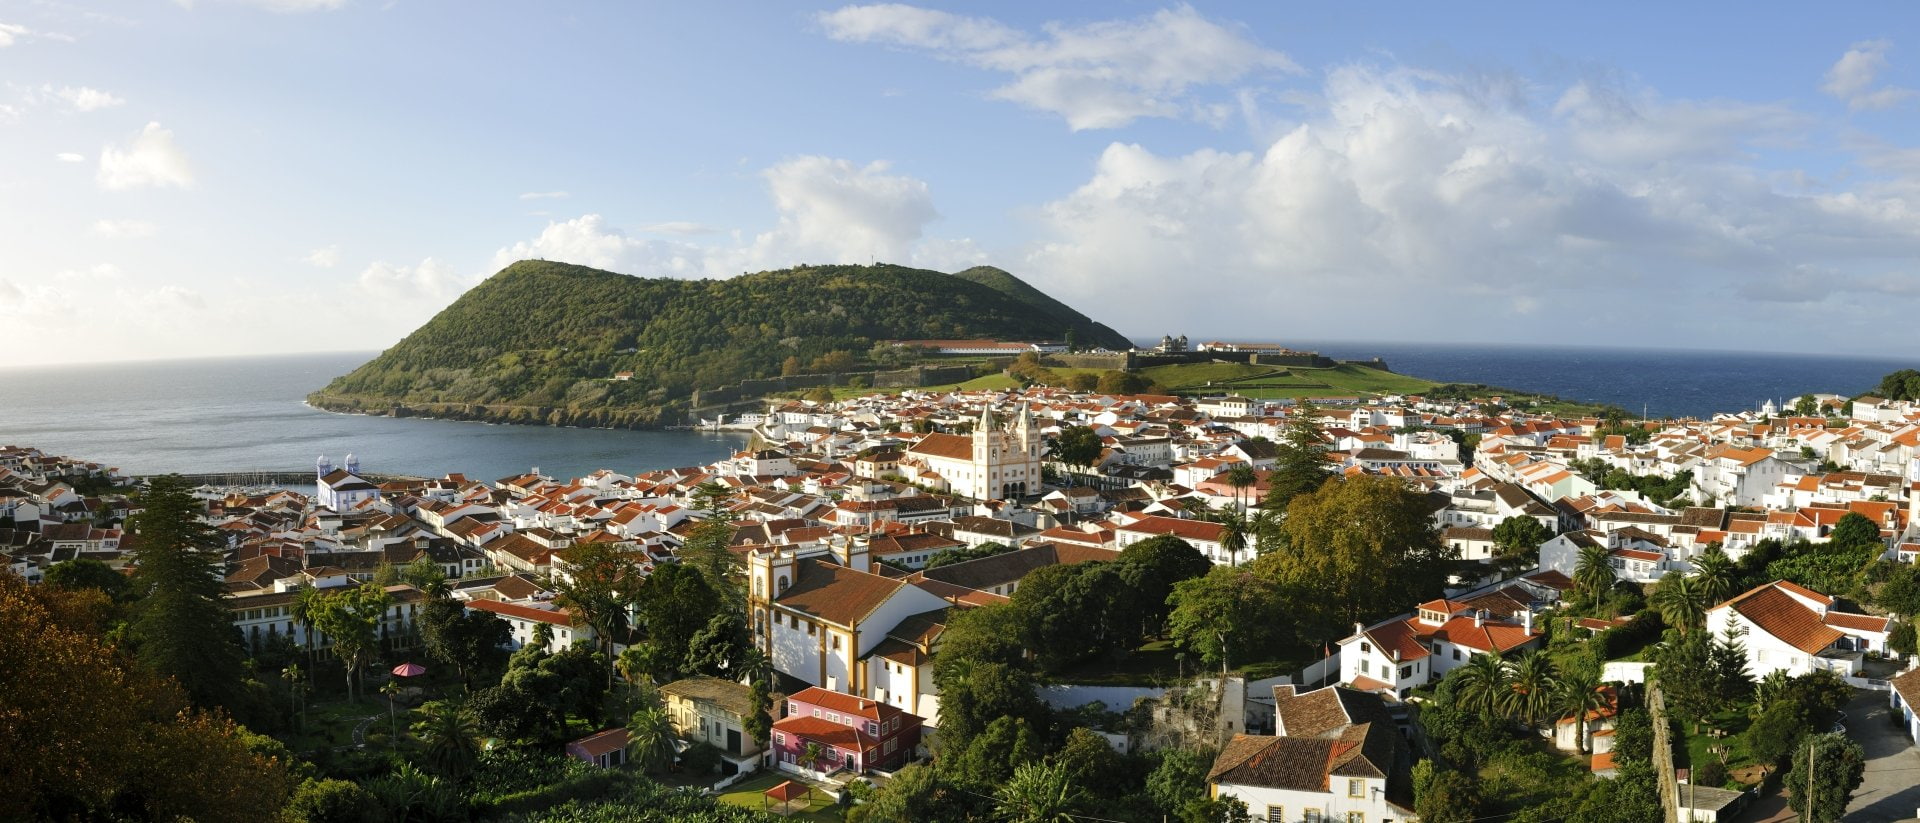 Man Made, Town, Azores, Portugal